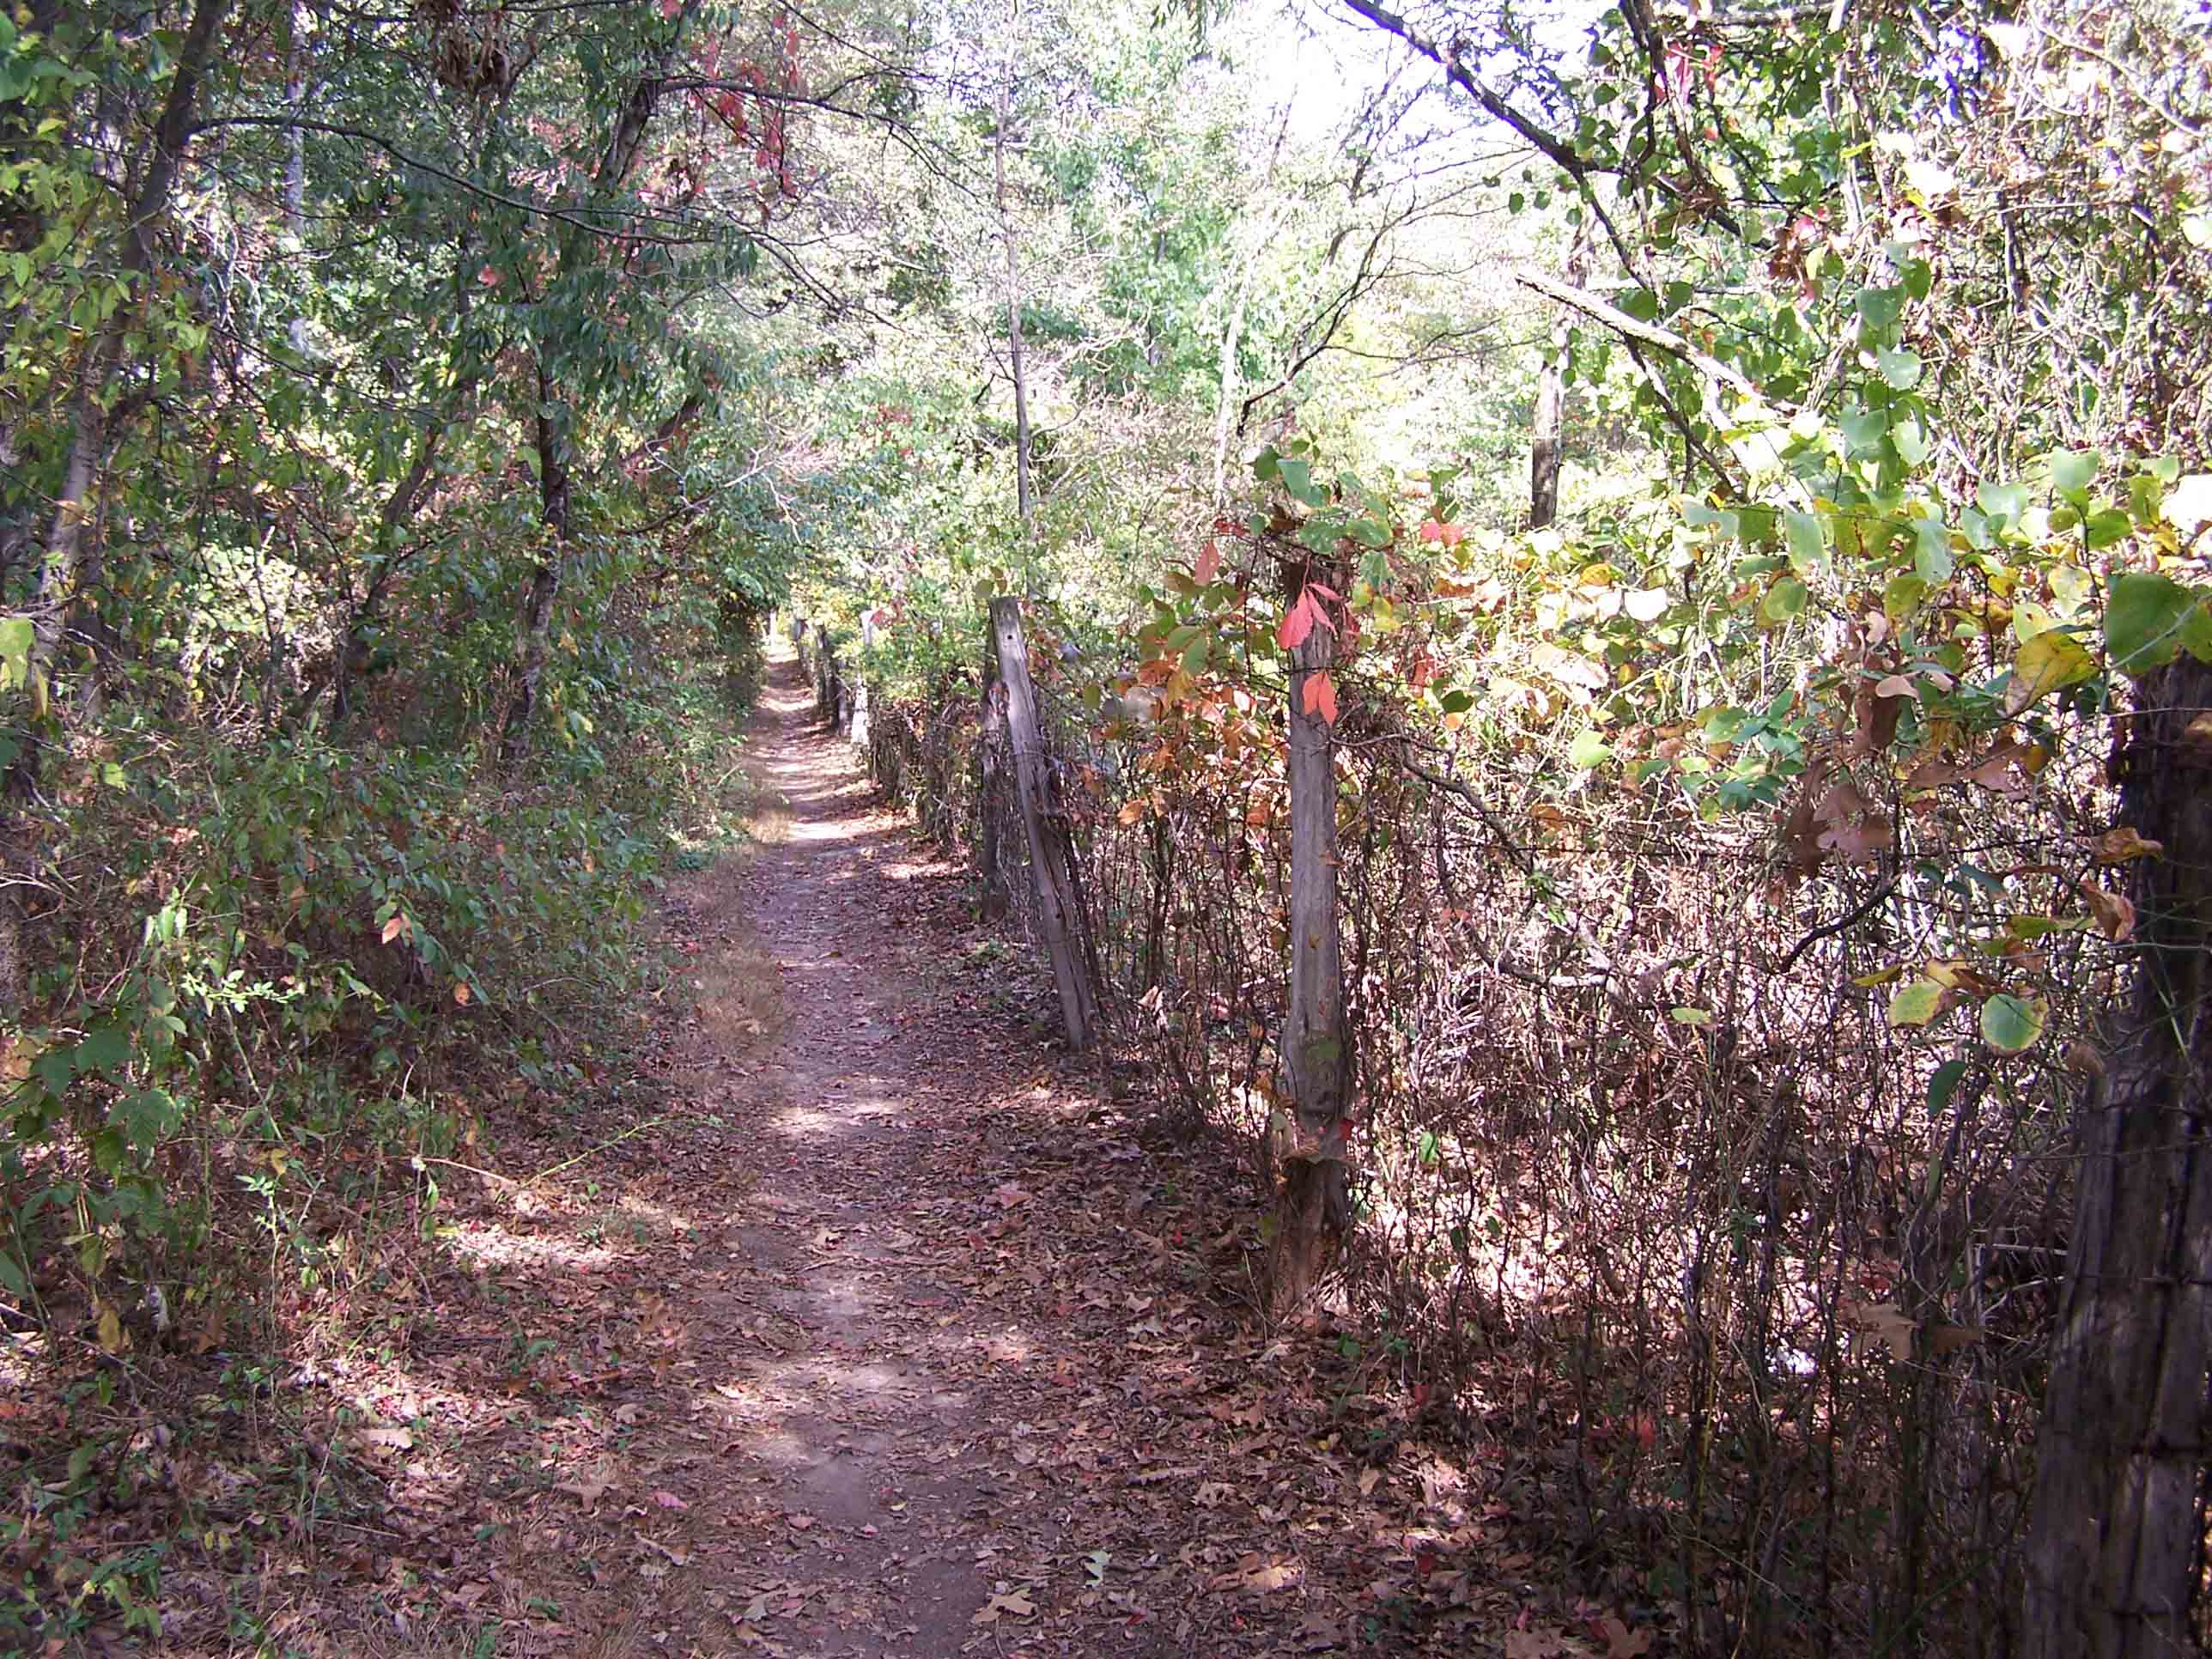 mm 6.2 - Barbwire fence along trail looking north. Courtesy at@rohland.org